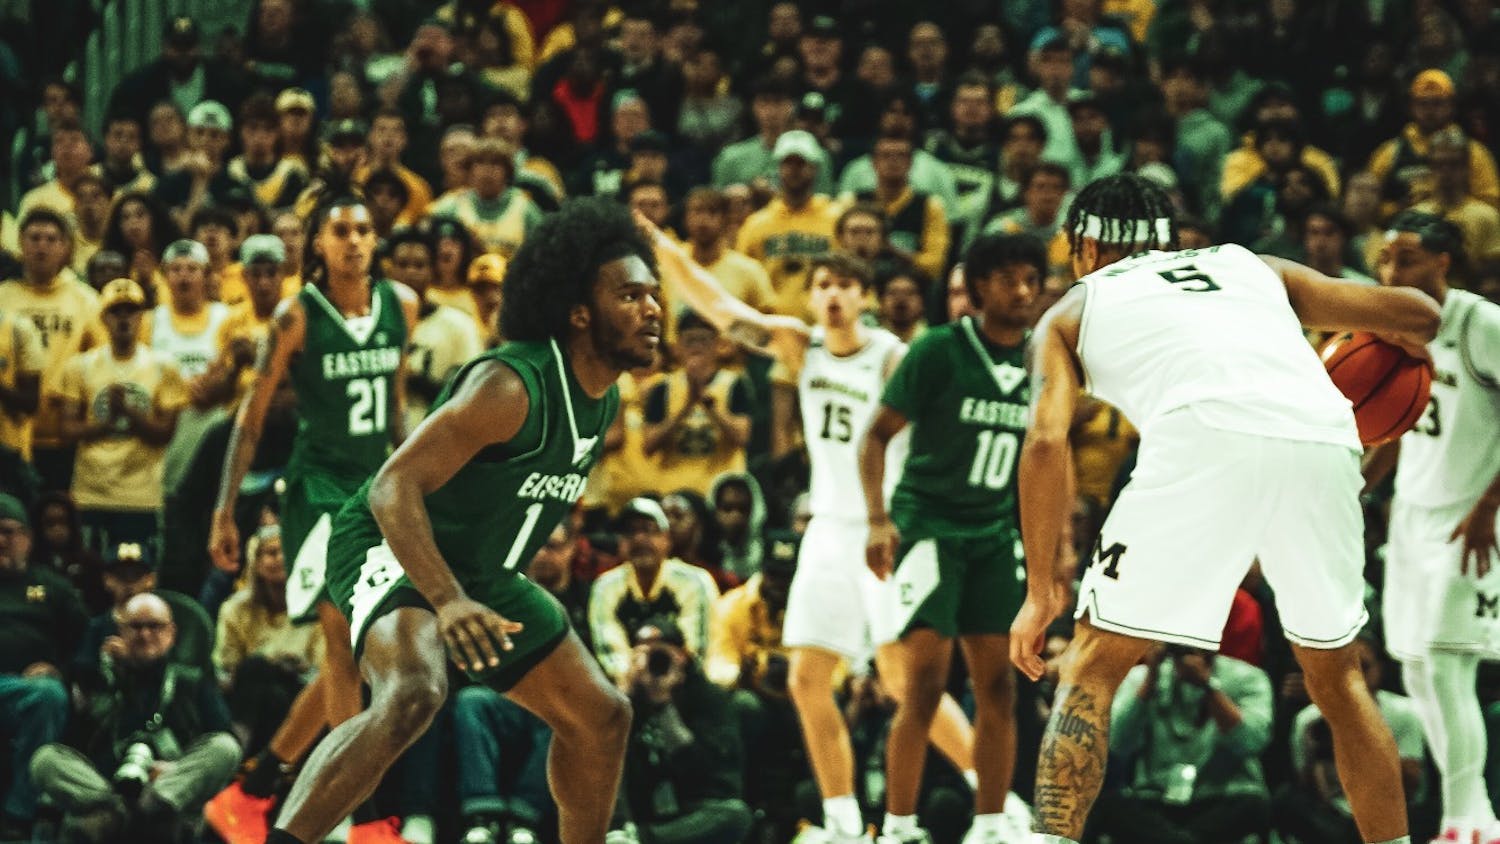 EMU men's basketball faces the Michigan Wolverines at Little Caesars Arena 